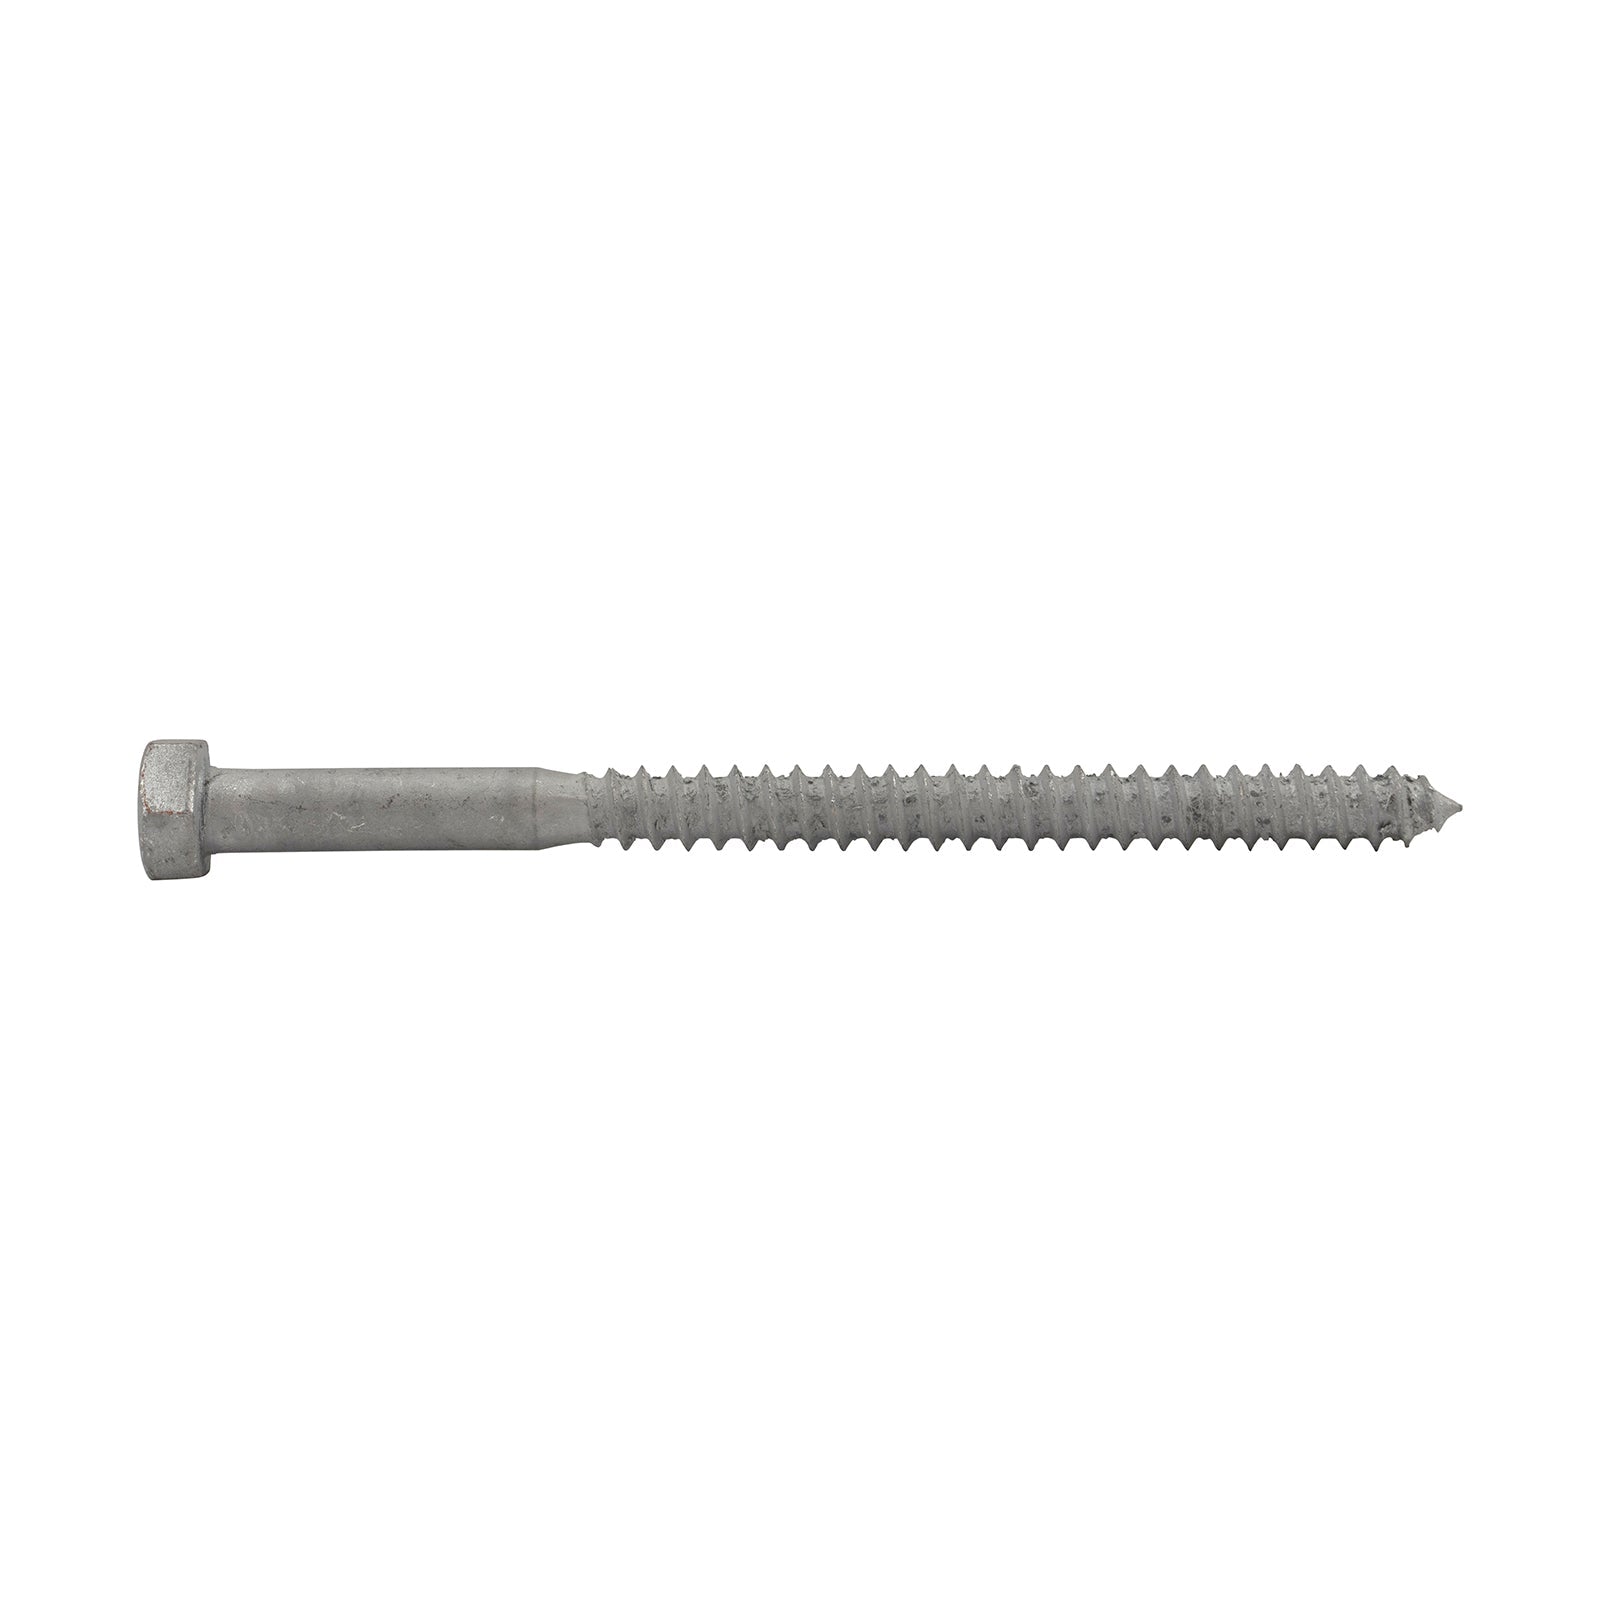 5/16"-9 x 4-1/2" Conquest Hex Head Lag Bolt for Wood - Hot Dip Galvanized